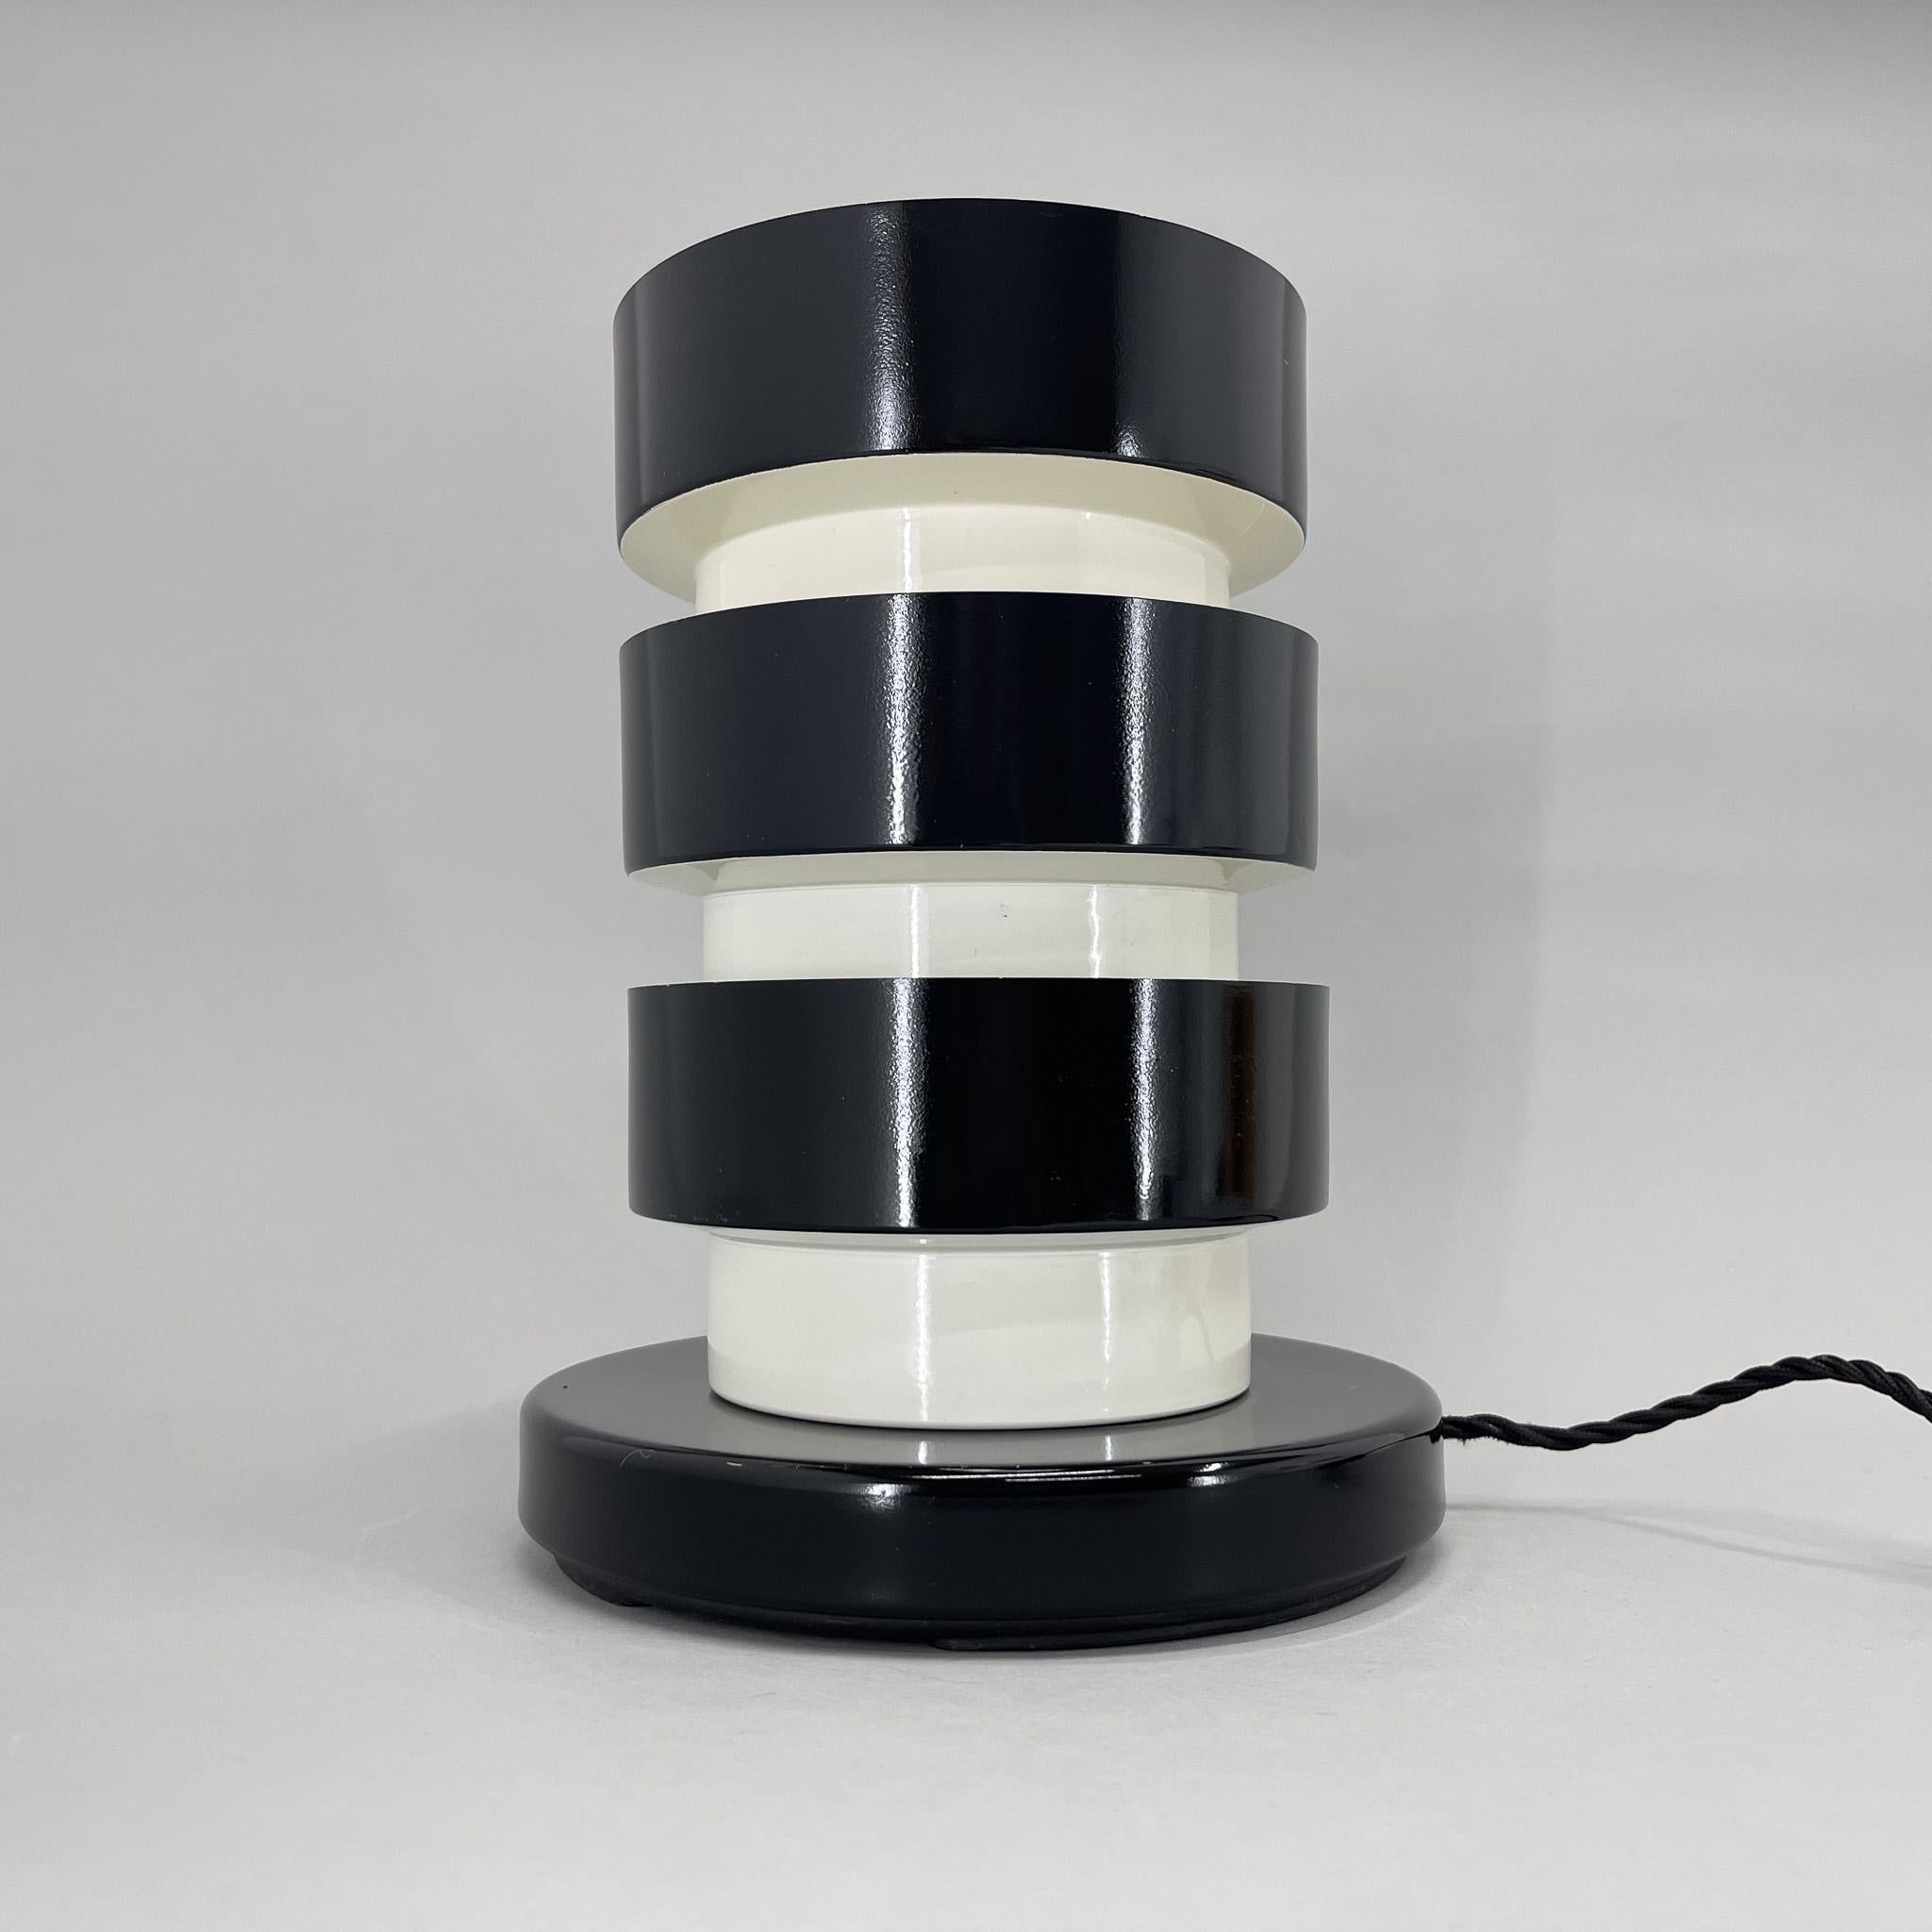 One of a kind vintage black & white metal table lamp from former Czechoslovakia. The lamp was completely restored. 
Bulbs: 1 x E26-E27. 
US plug adapter included.